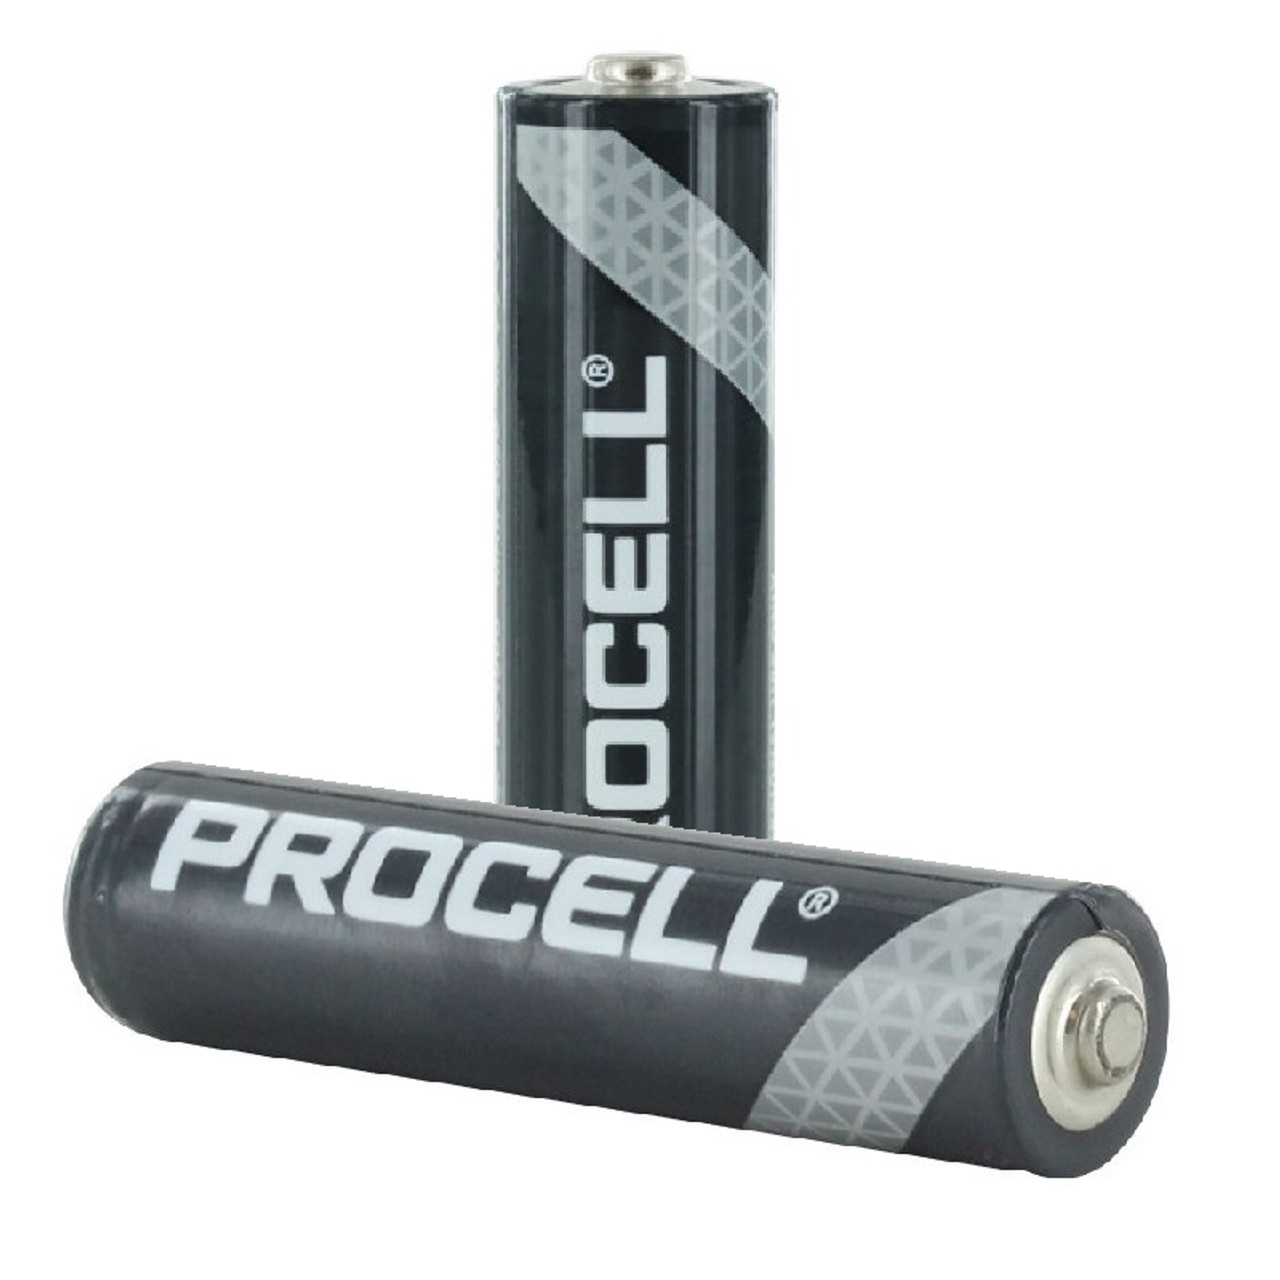 Duracell PC1500 Procell Professional AA Alkaline Batteries (24-Pack)